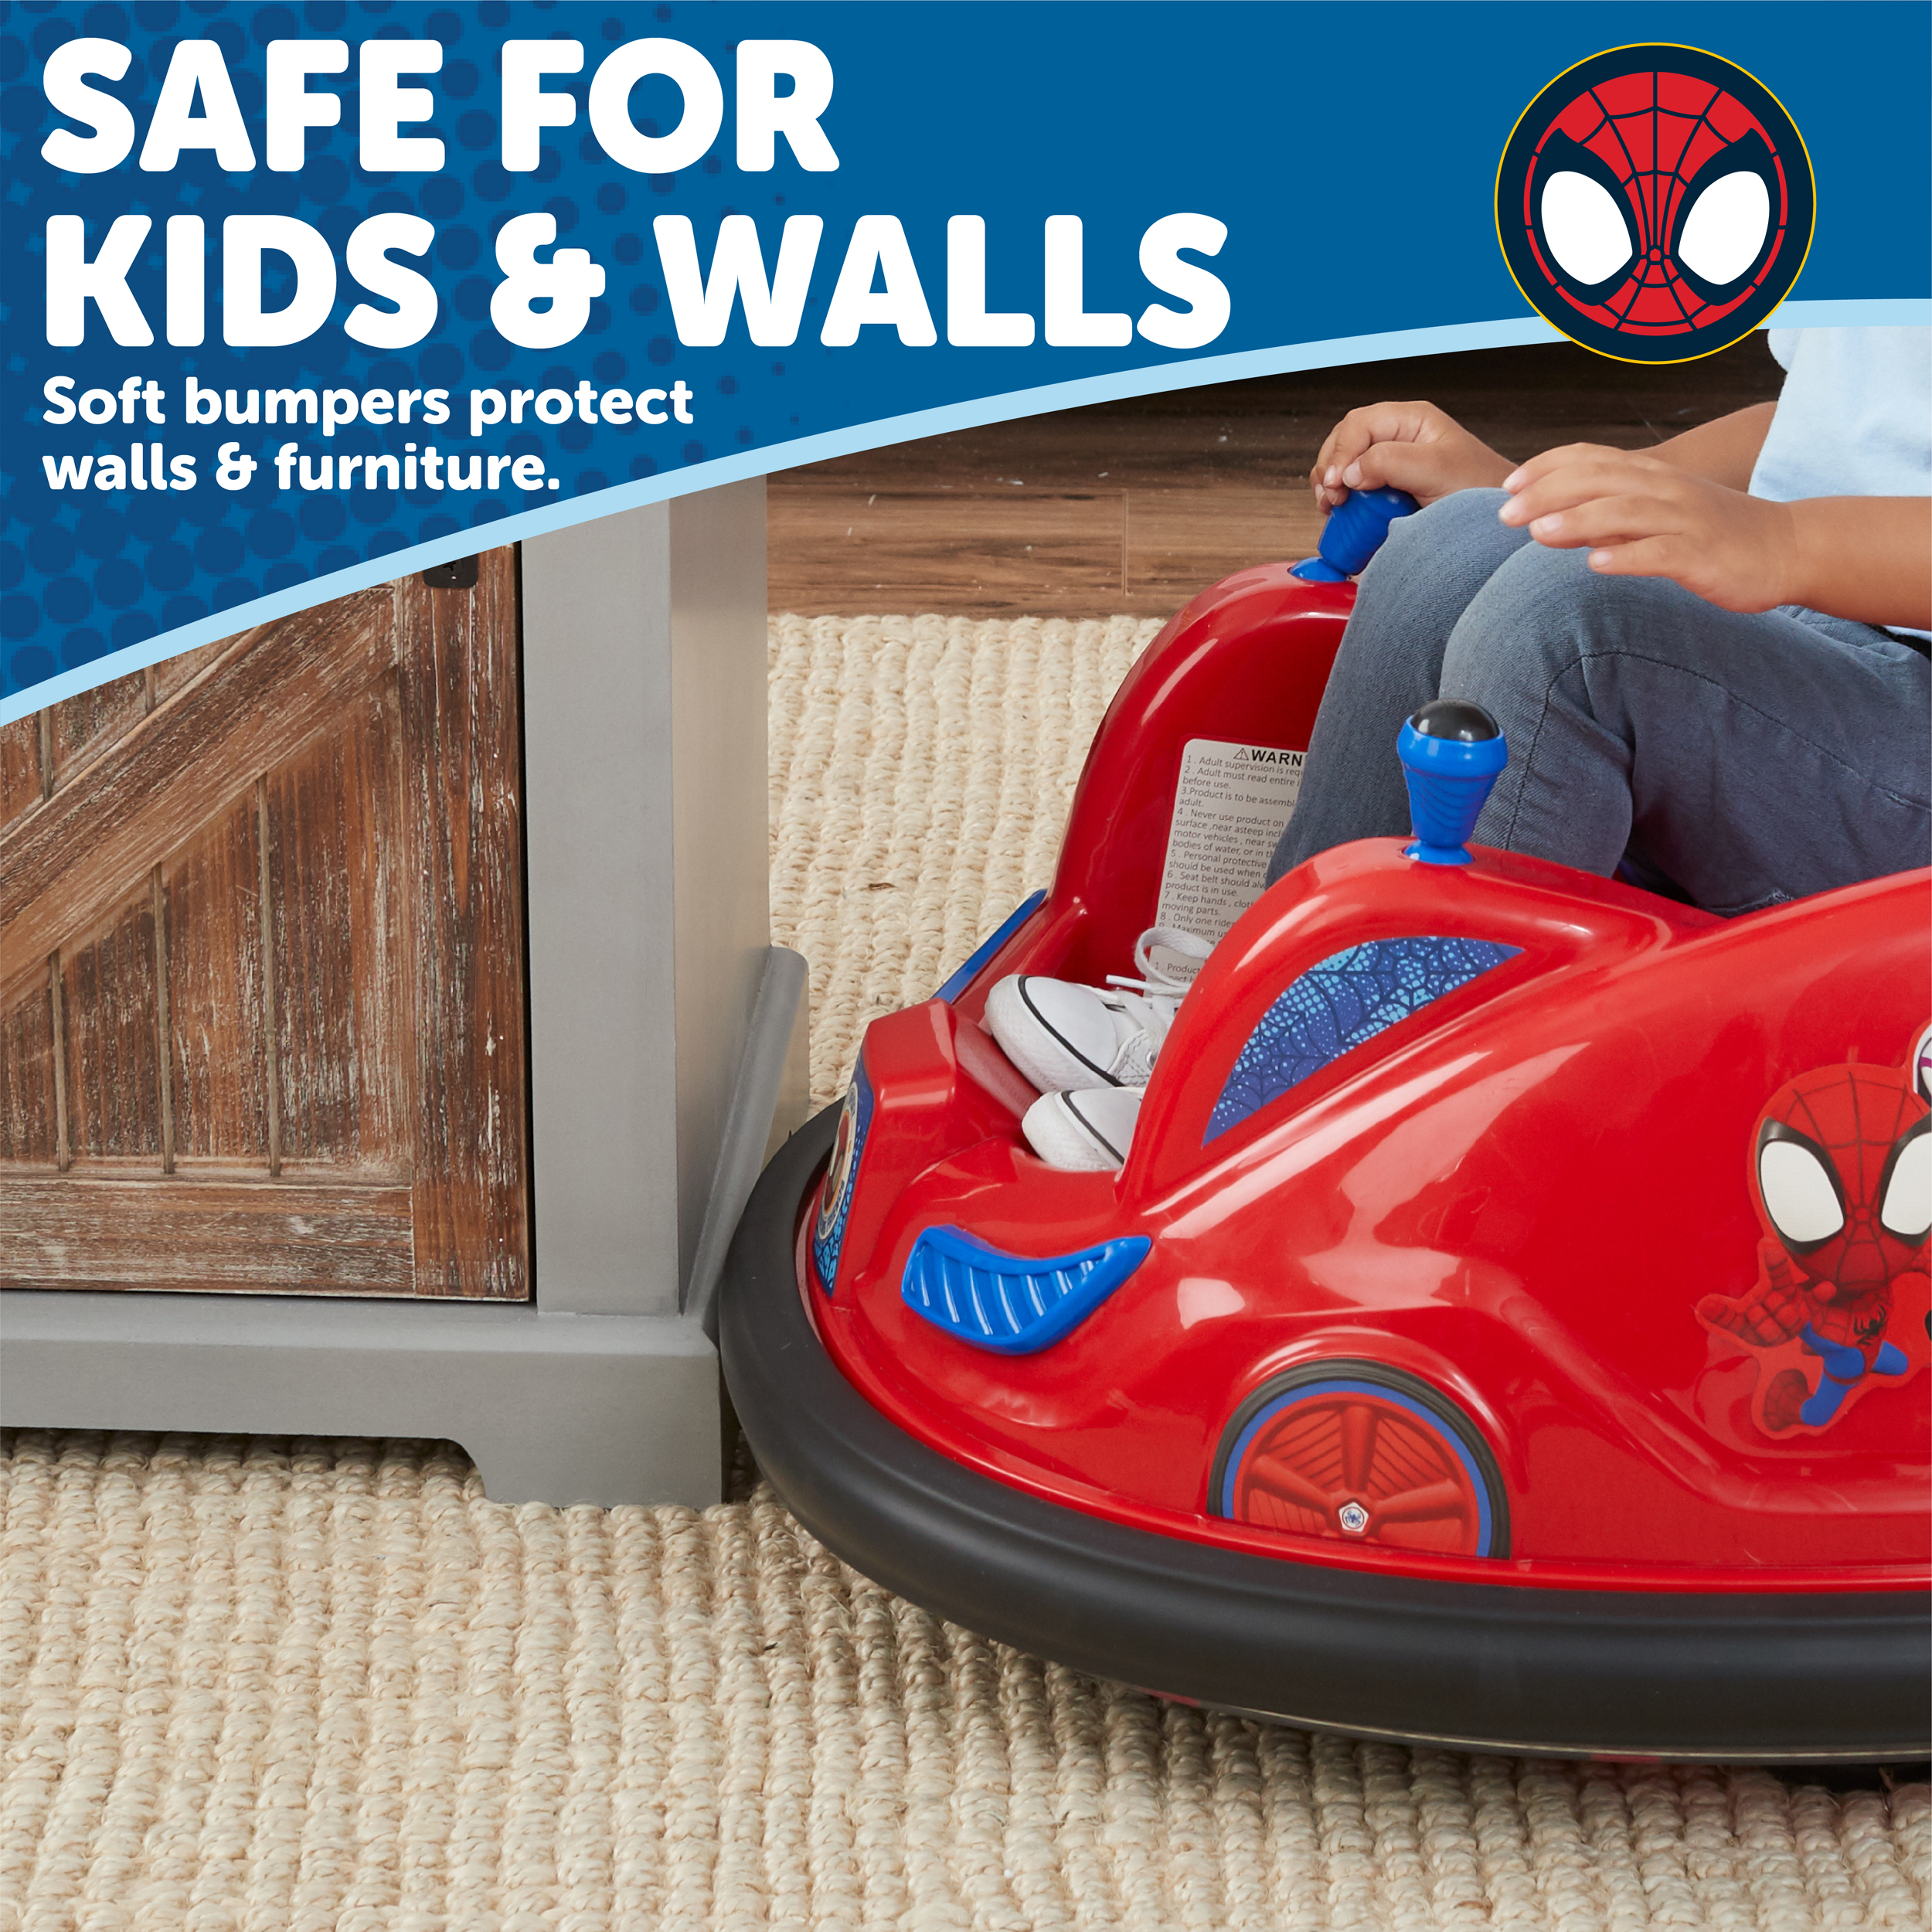 Spidey and His Amazing Friends, 6 Volts Bumper Car, Battery Powered Ride on, Fun LED Lights Includes, Charger, Ages 1.5- 4 Years, Unisex - image 3 of 14